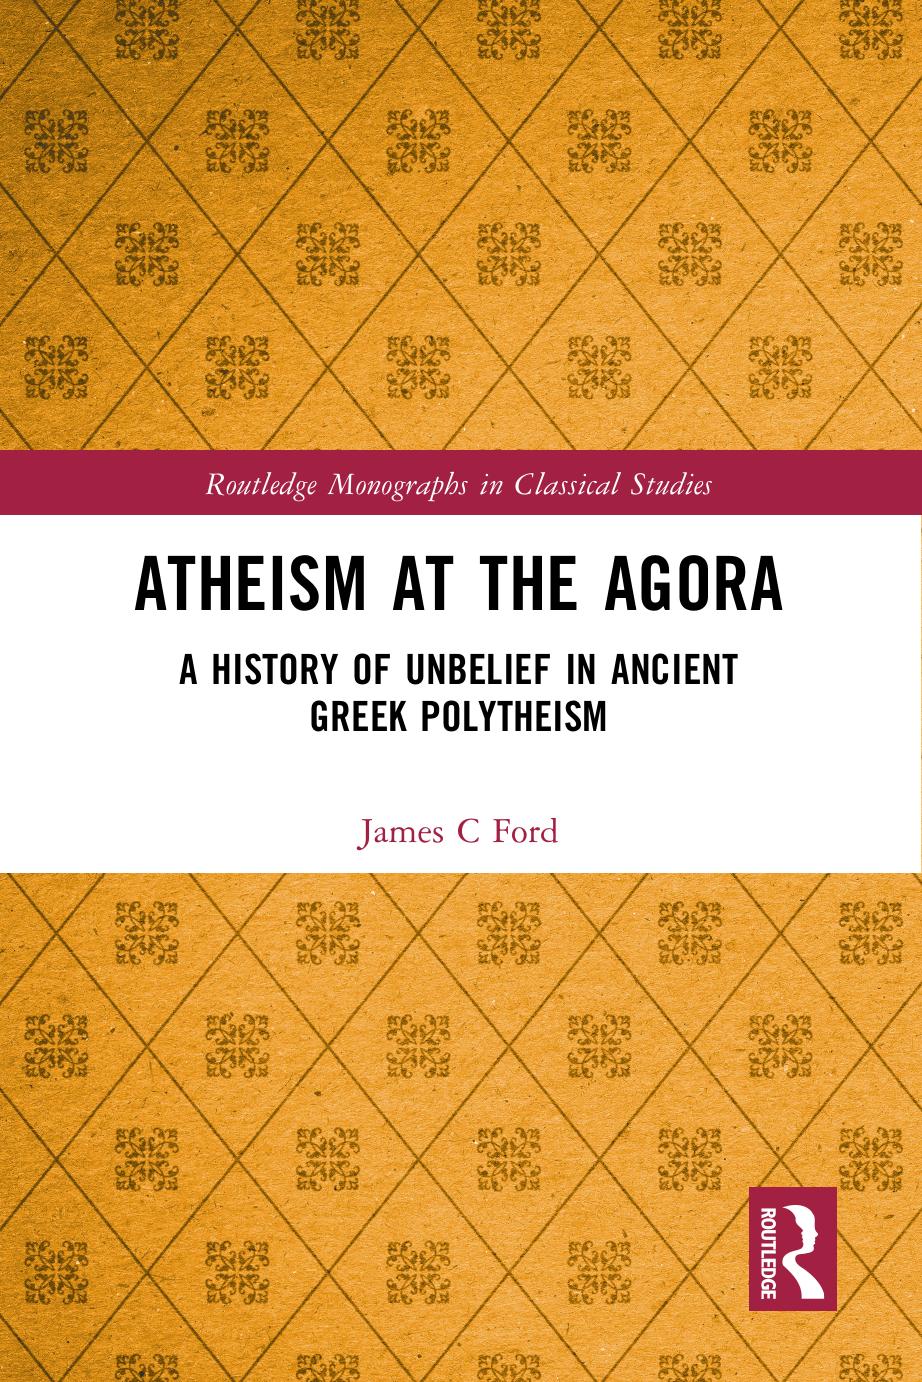 Atheism at the Agora: A History of Unbelief in Ancient Greek Polytheism by James C Ford